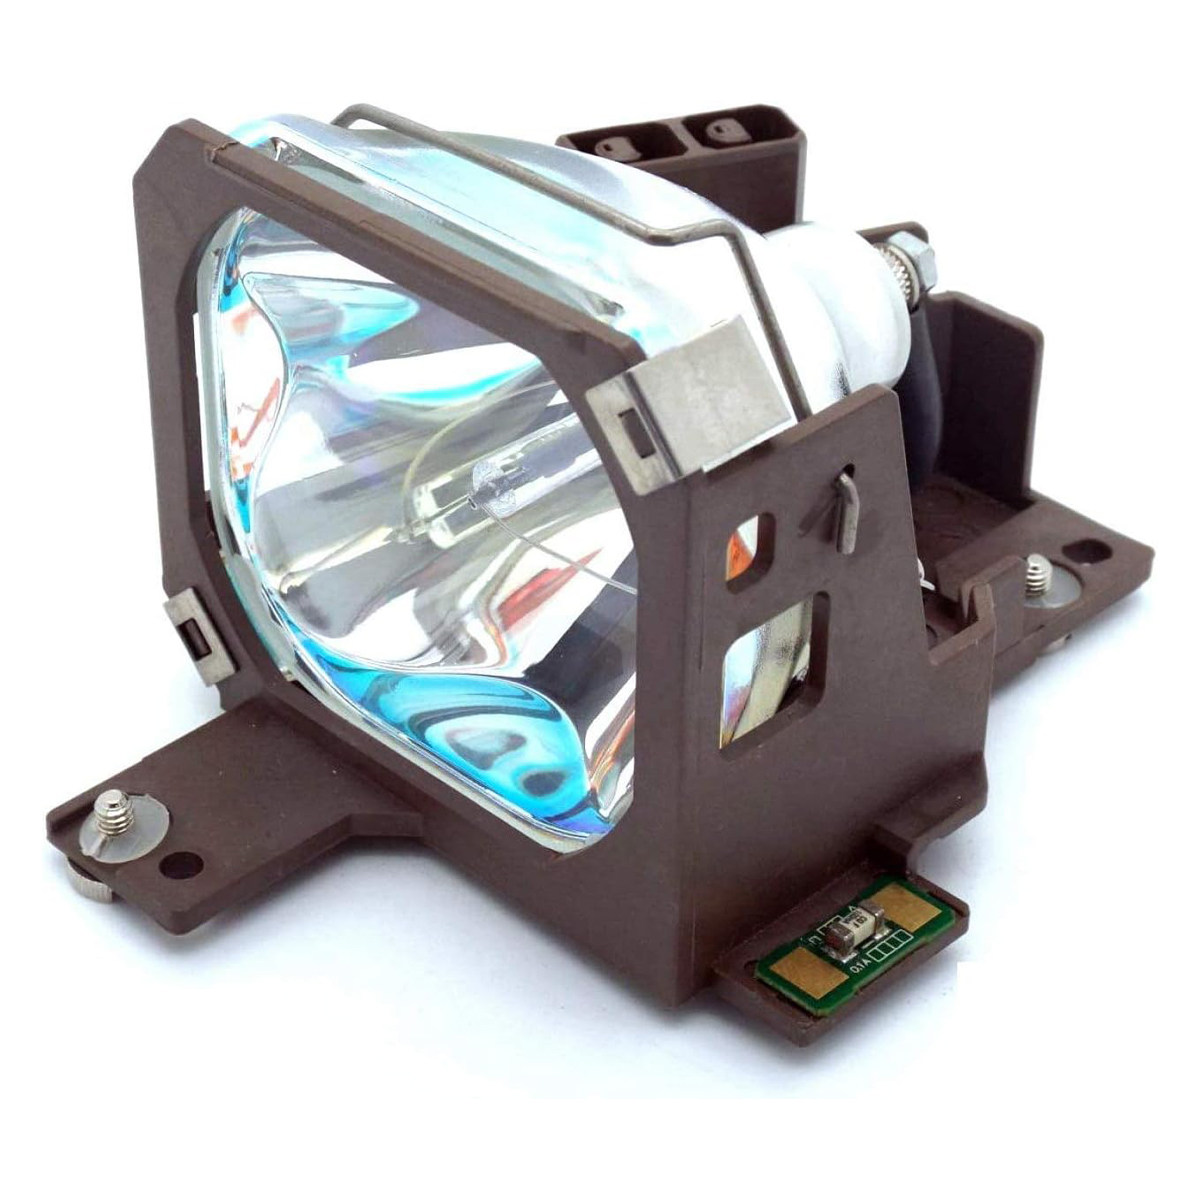 Replacement Projector lamp ELPLP06 For Epson ELP-5500 EMP-5500 EMP-7500